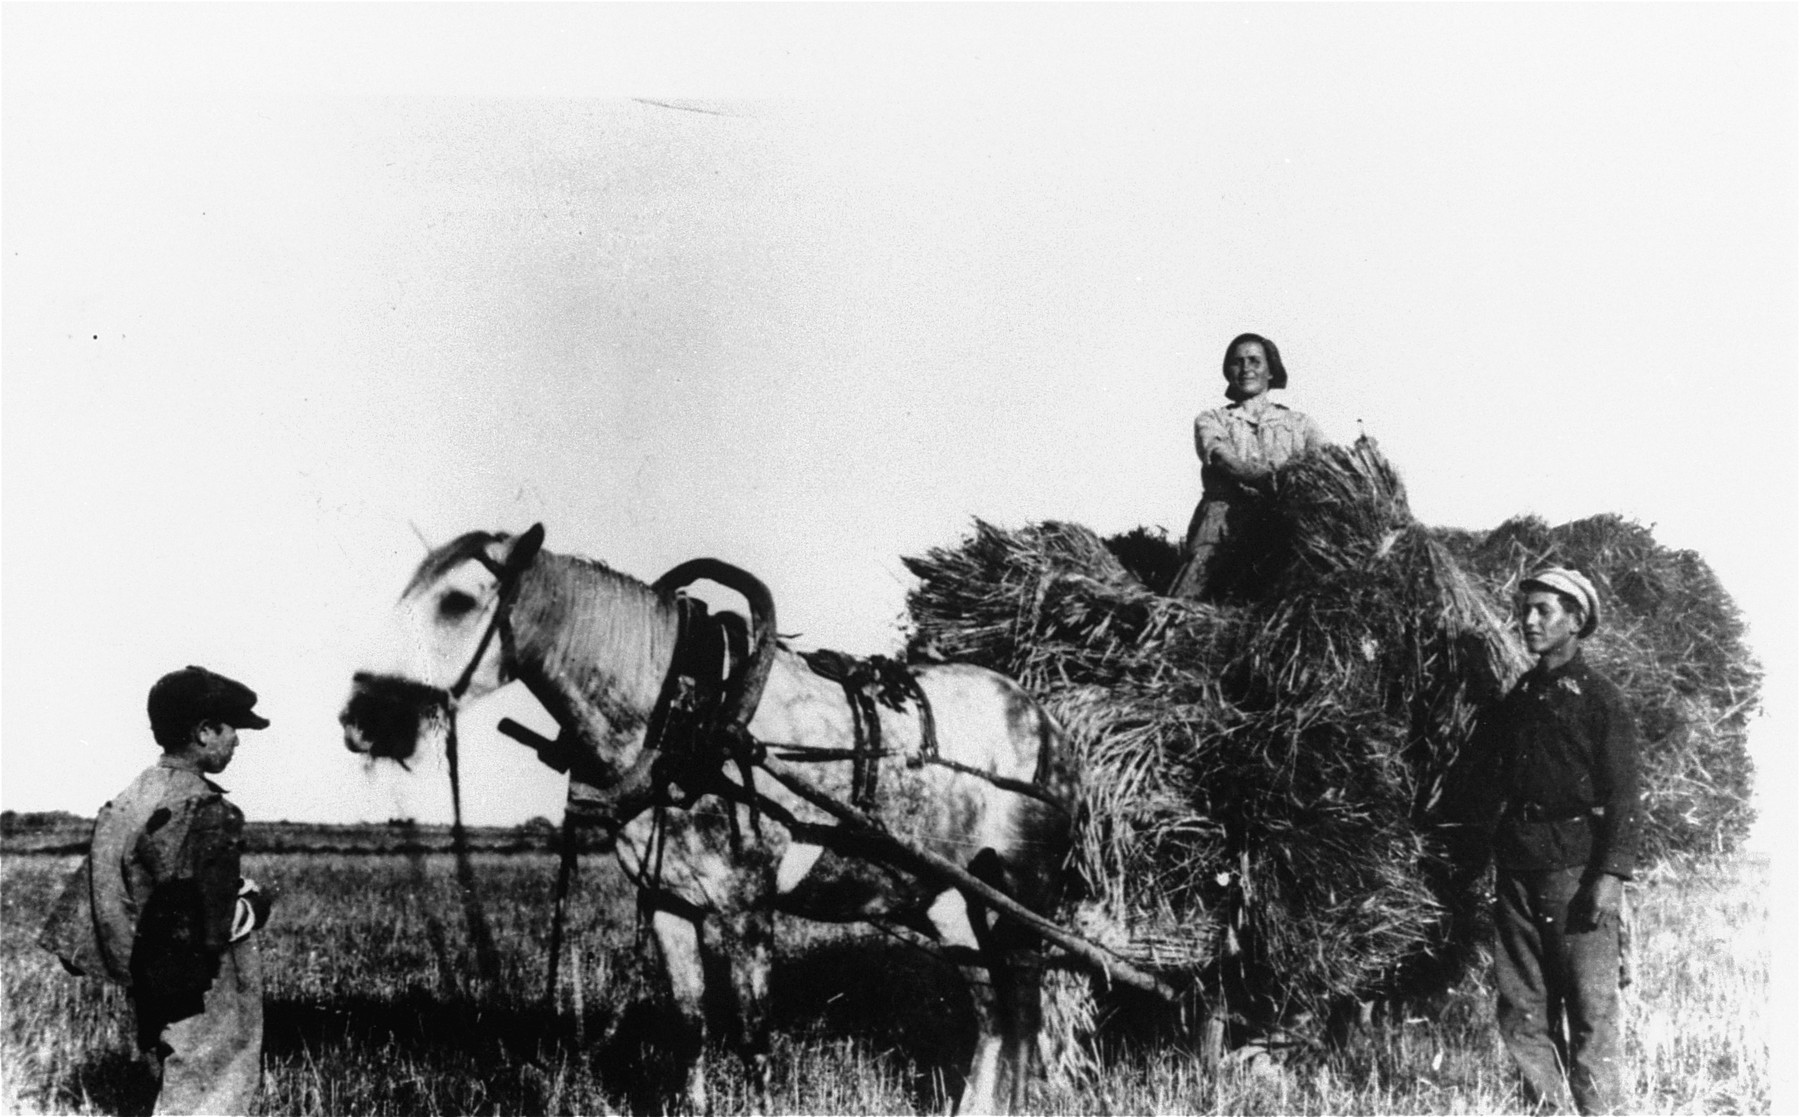 A family of Jewish farmers collects hay from the field and loads it onto their horse-drawn wagon.

Pictured are Chaim Rozenbaum (at the left), his aunt, Zippa Gorbut (on the wagon), and her son Avraham.